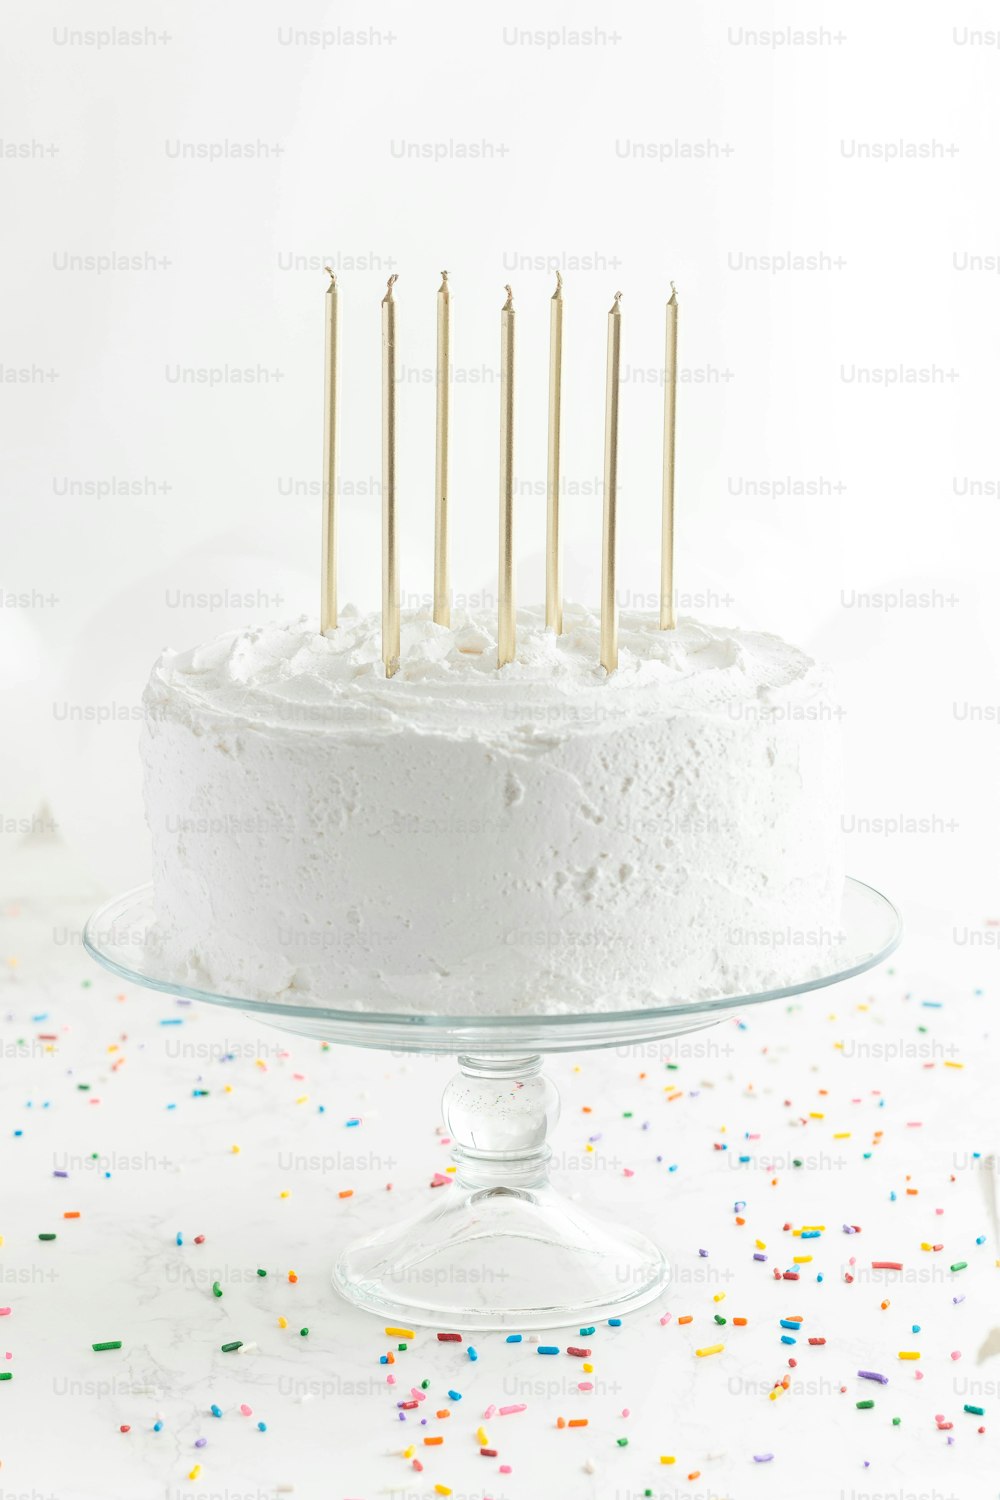 a cake with white frosting and gold candles